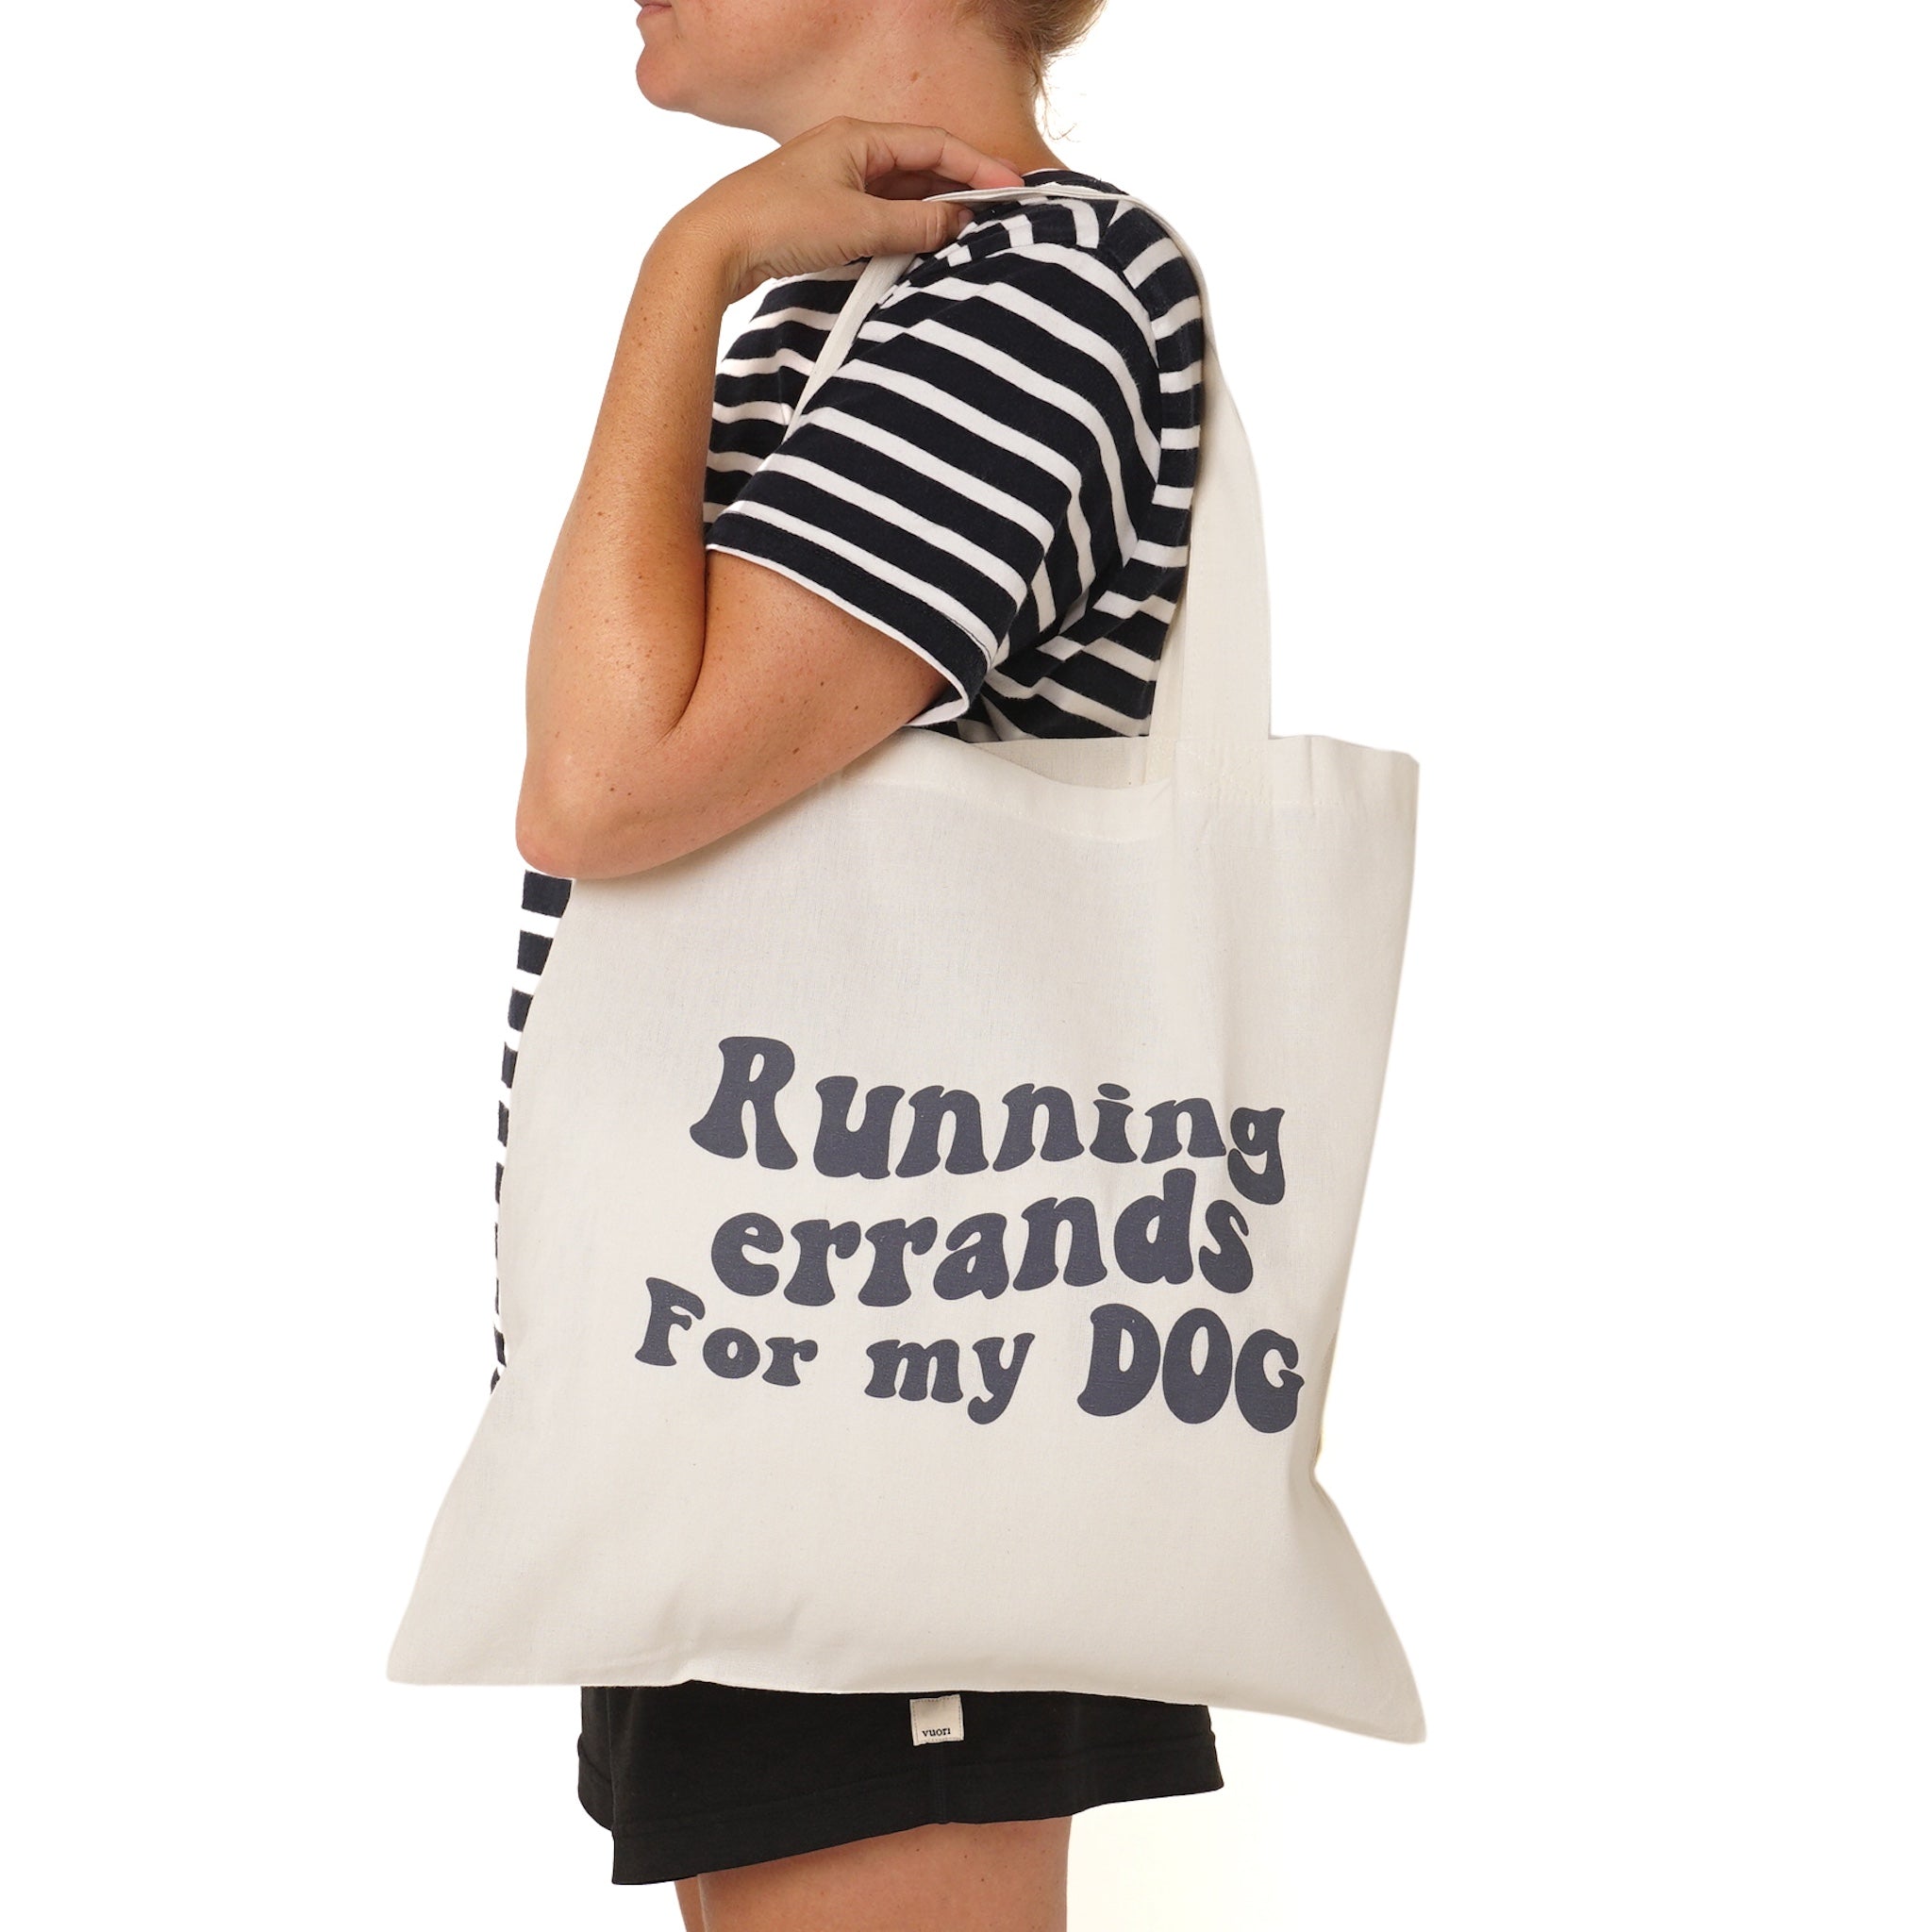 Running Errands For My Dog Tote - The Paws